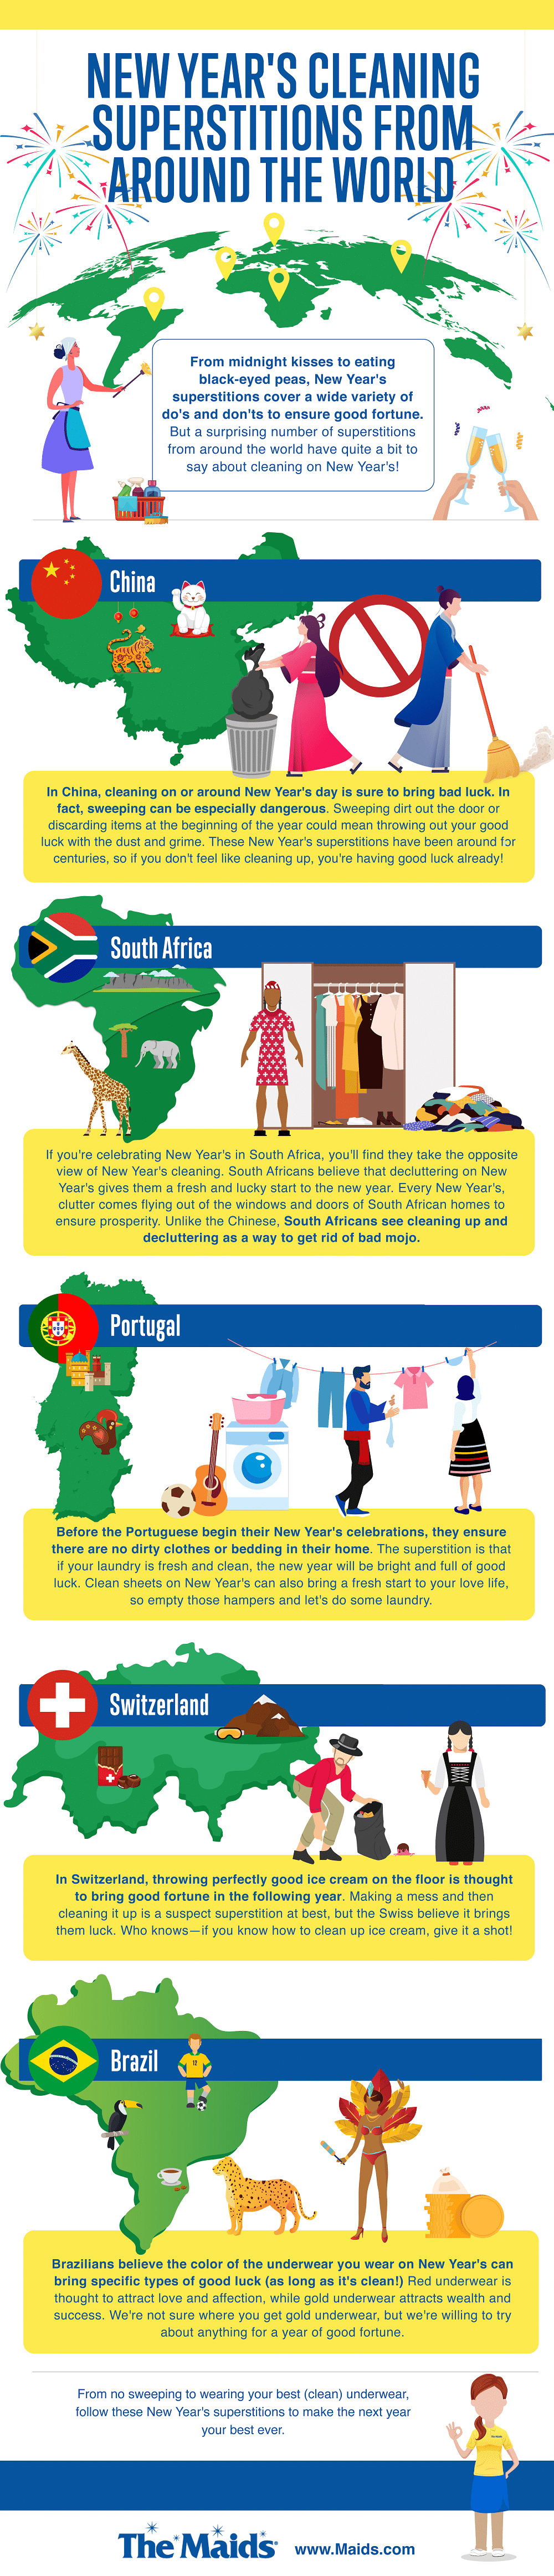 New Year's Cleaning Superstitions Infographic